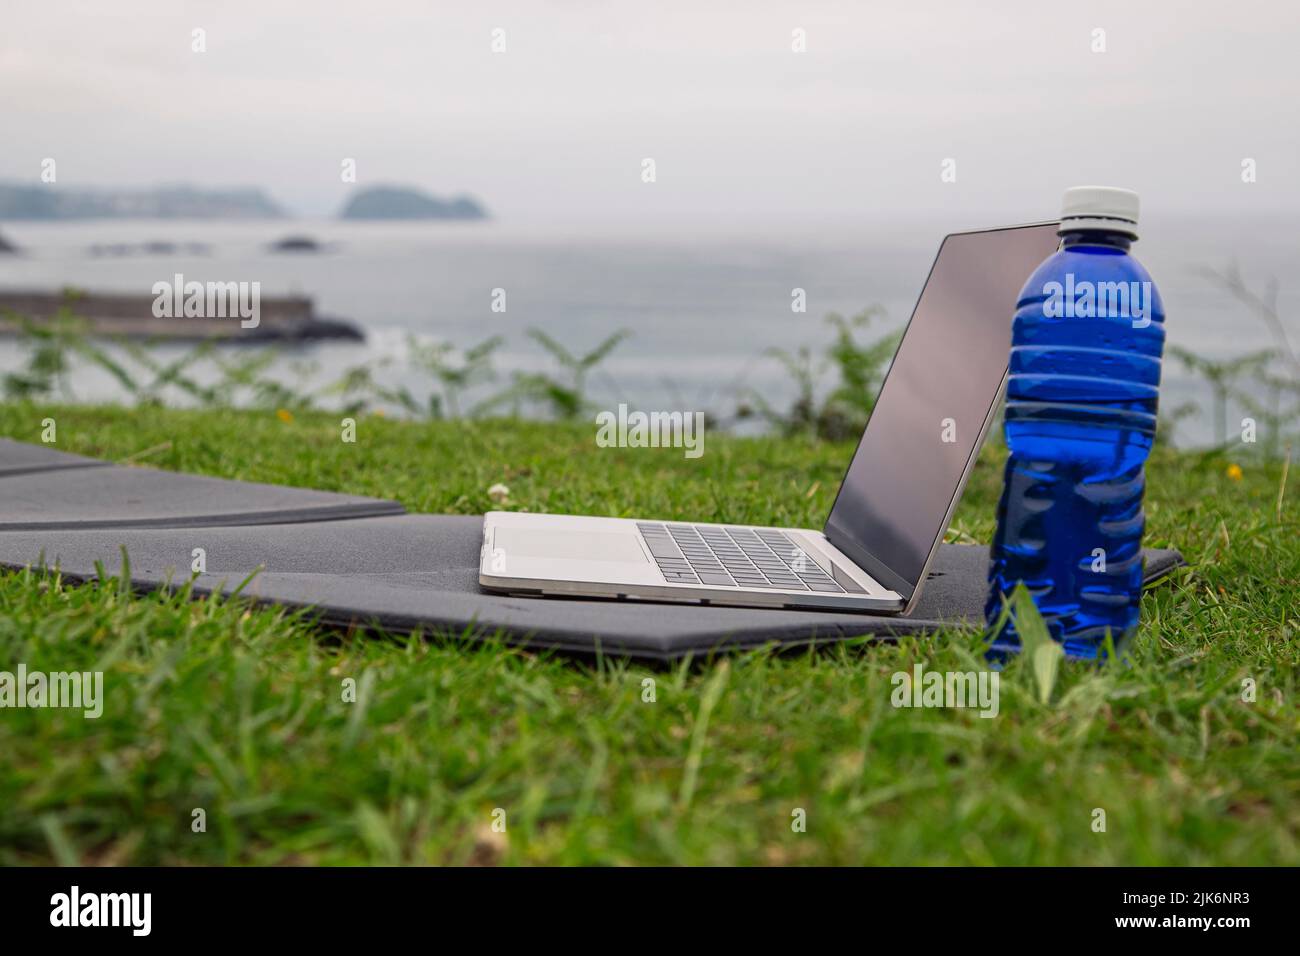 Online sports or yoga training concept Laptop with yoga mat, bottle of water outdoors Stock Photo